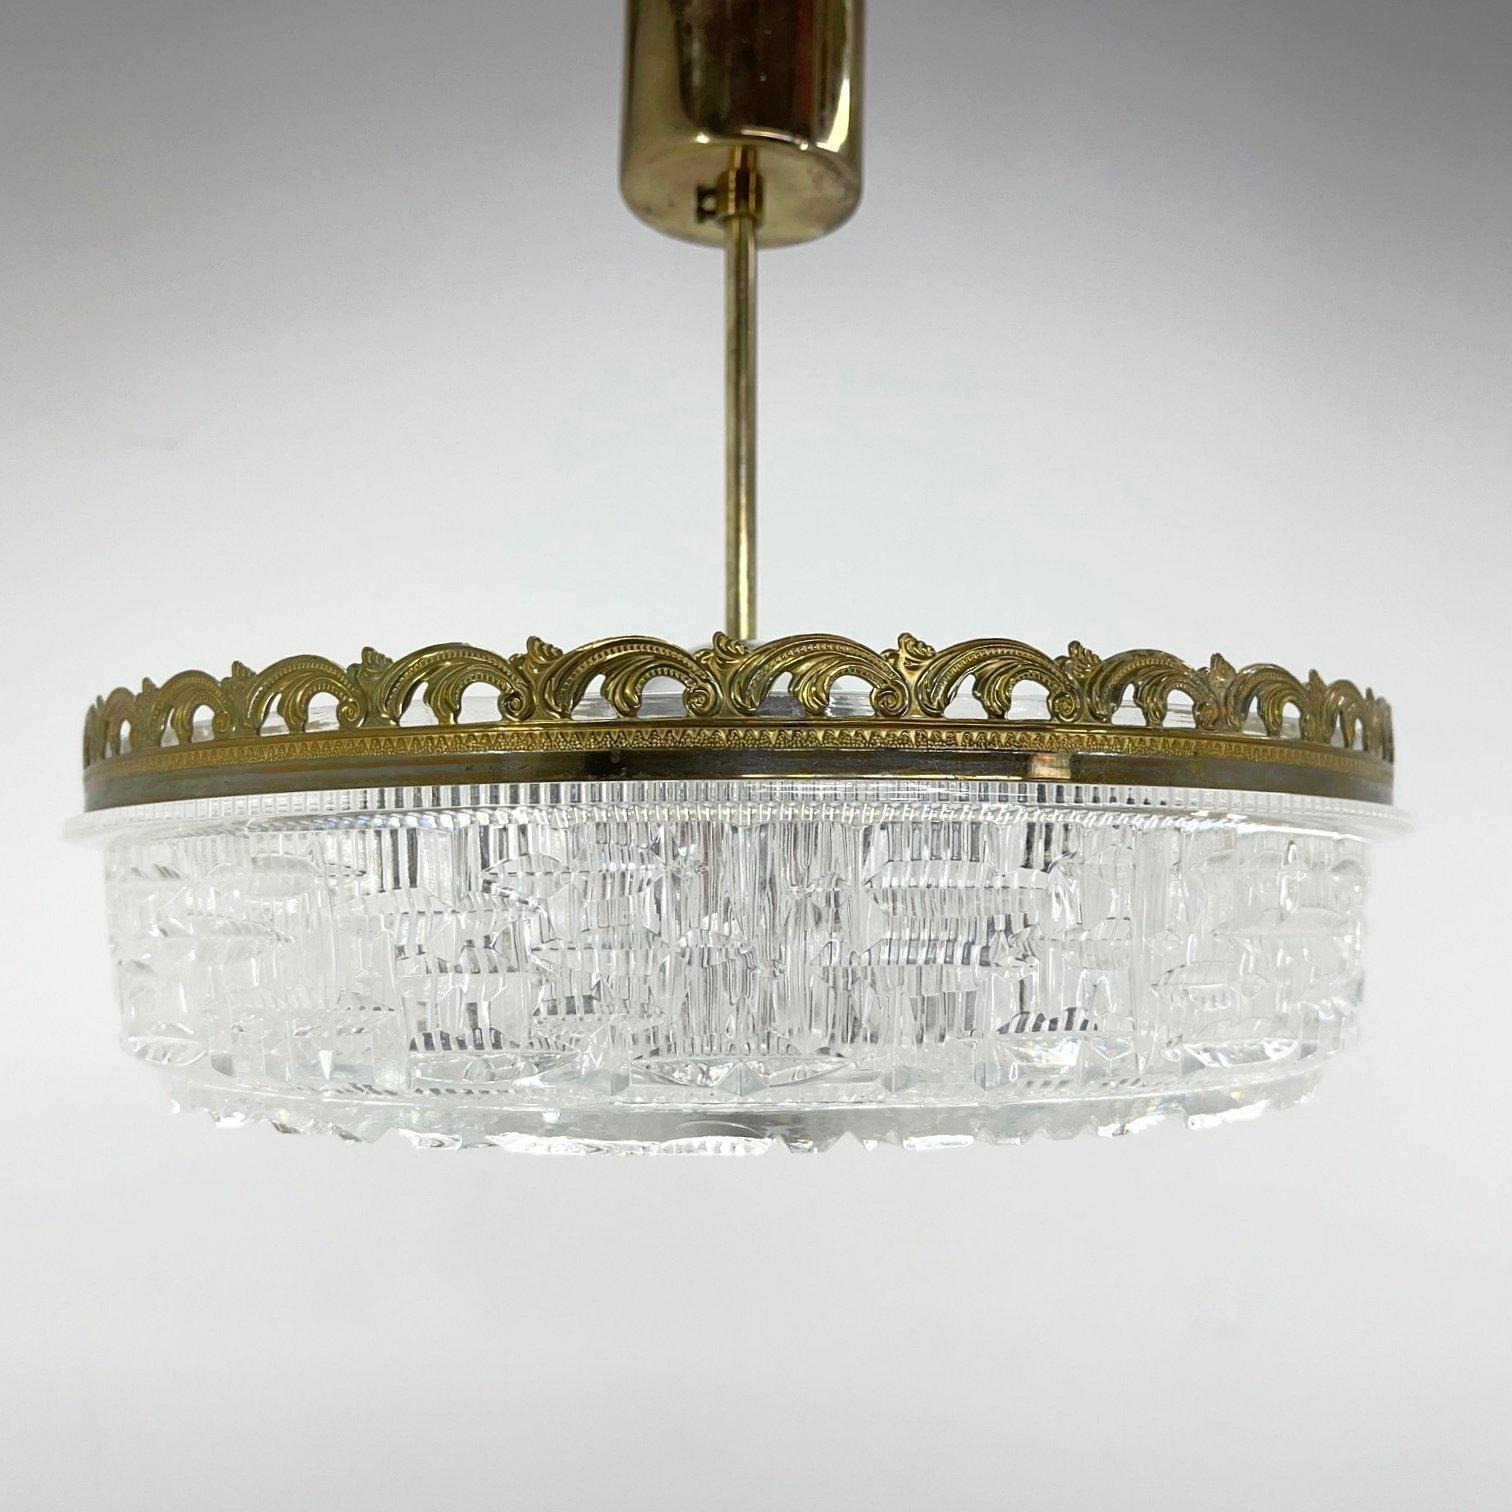 Mid-century glass pendant light with metal rim, produced in Czechoslovakia in the 1960's. Bulb: 2 x E25-E27.